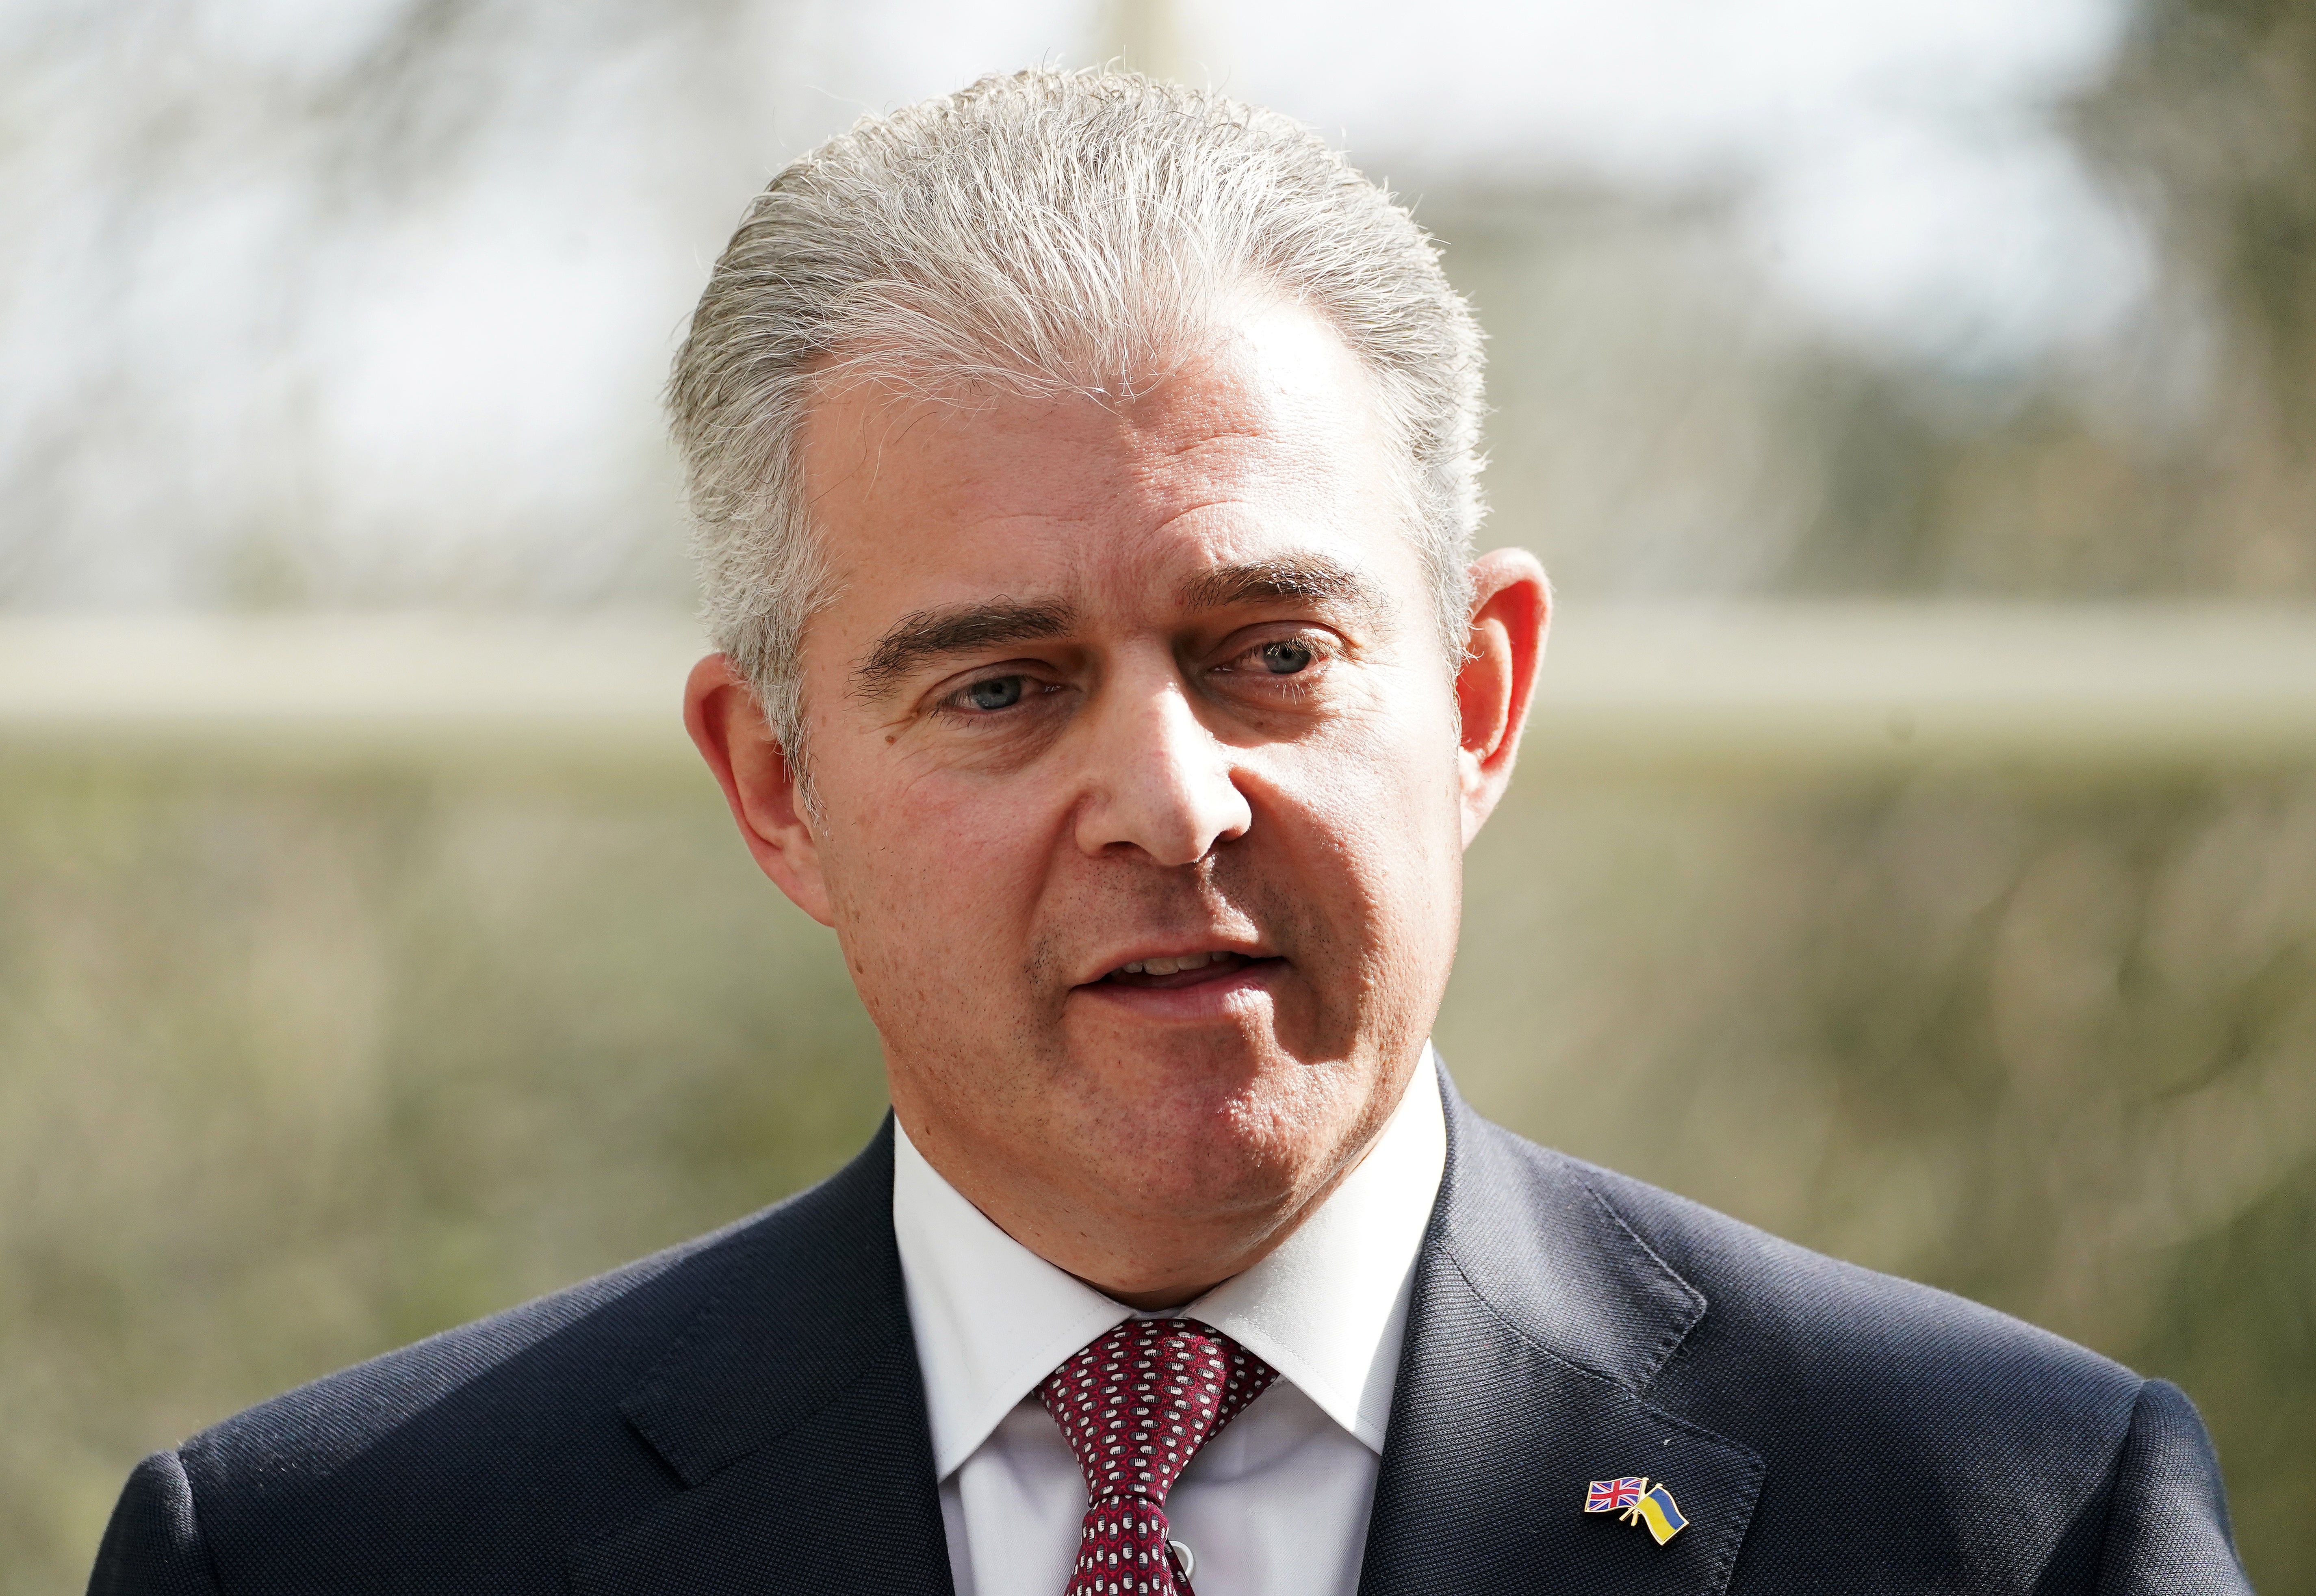 Northern Ireland Secretary Brandon Lewis has taken action to ensure abortion services are available across the region (PA)